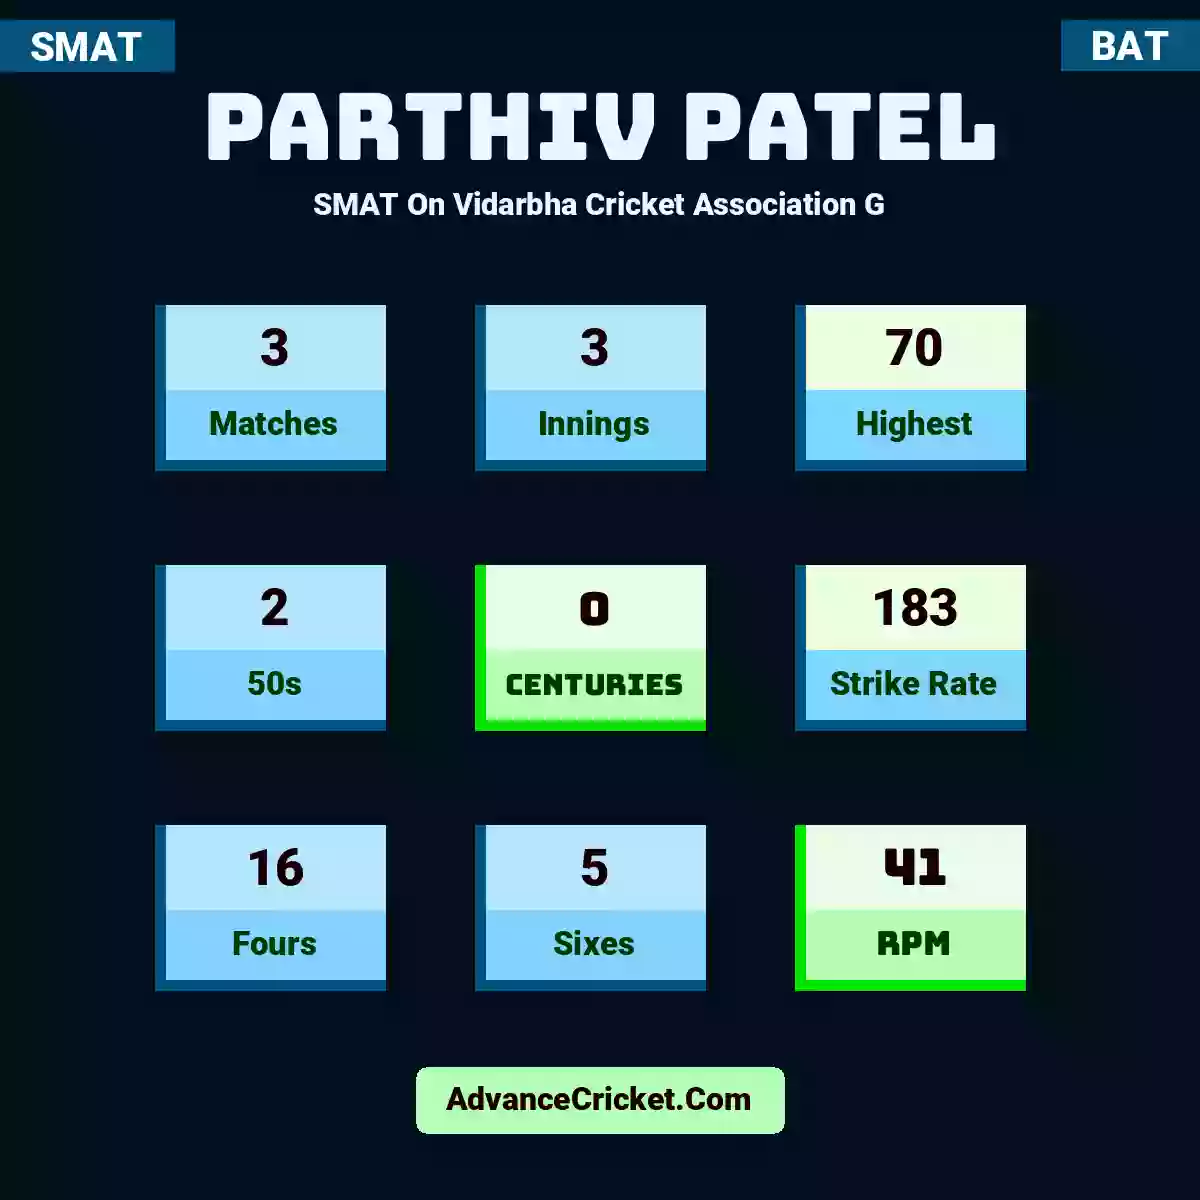 Parthiv Patel SMAT  On Vidarbha Cricket Association G, Parthiv Patel played 3 matches, scored 70 runs as highest, 2 half-centuries, and 0 centuries, with a strike rate of 183. P.Patel hit 16 fours and 5 sixes, with an RPM of 41.